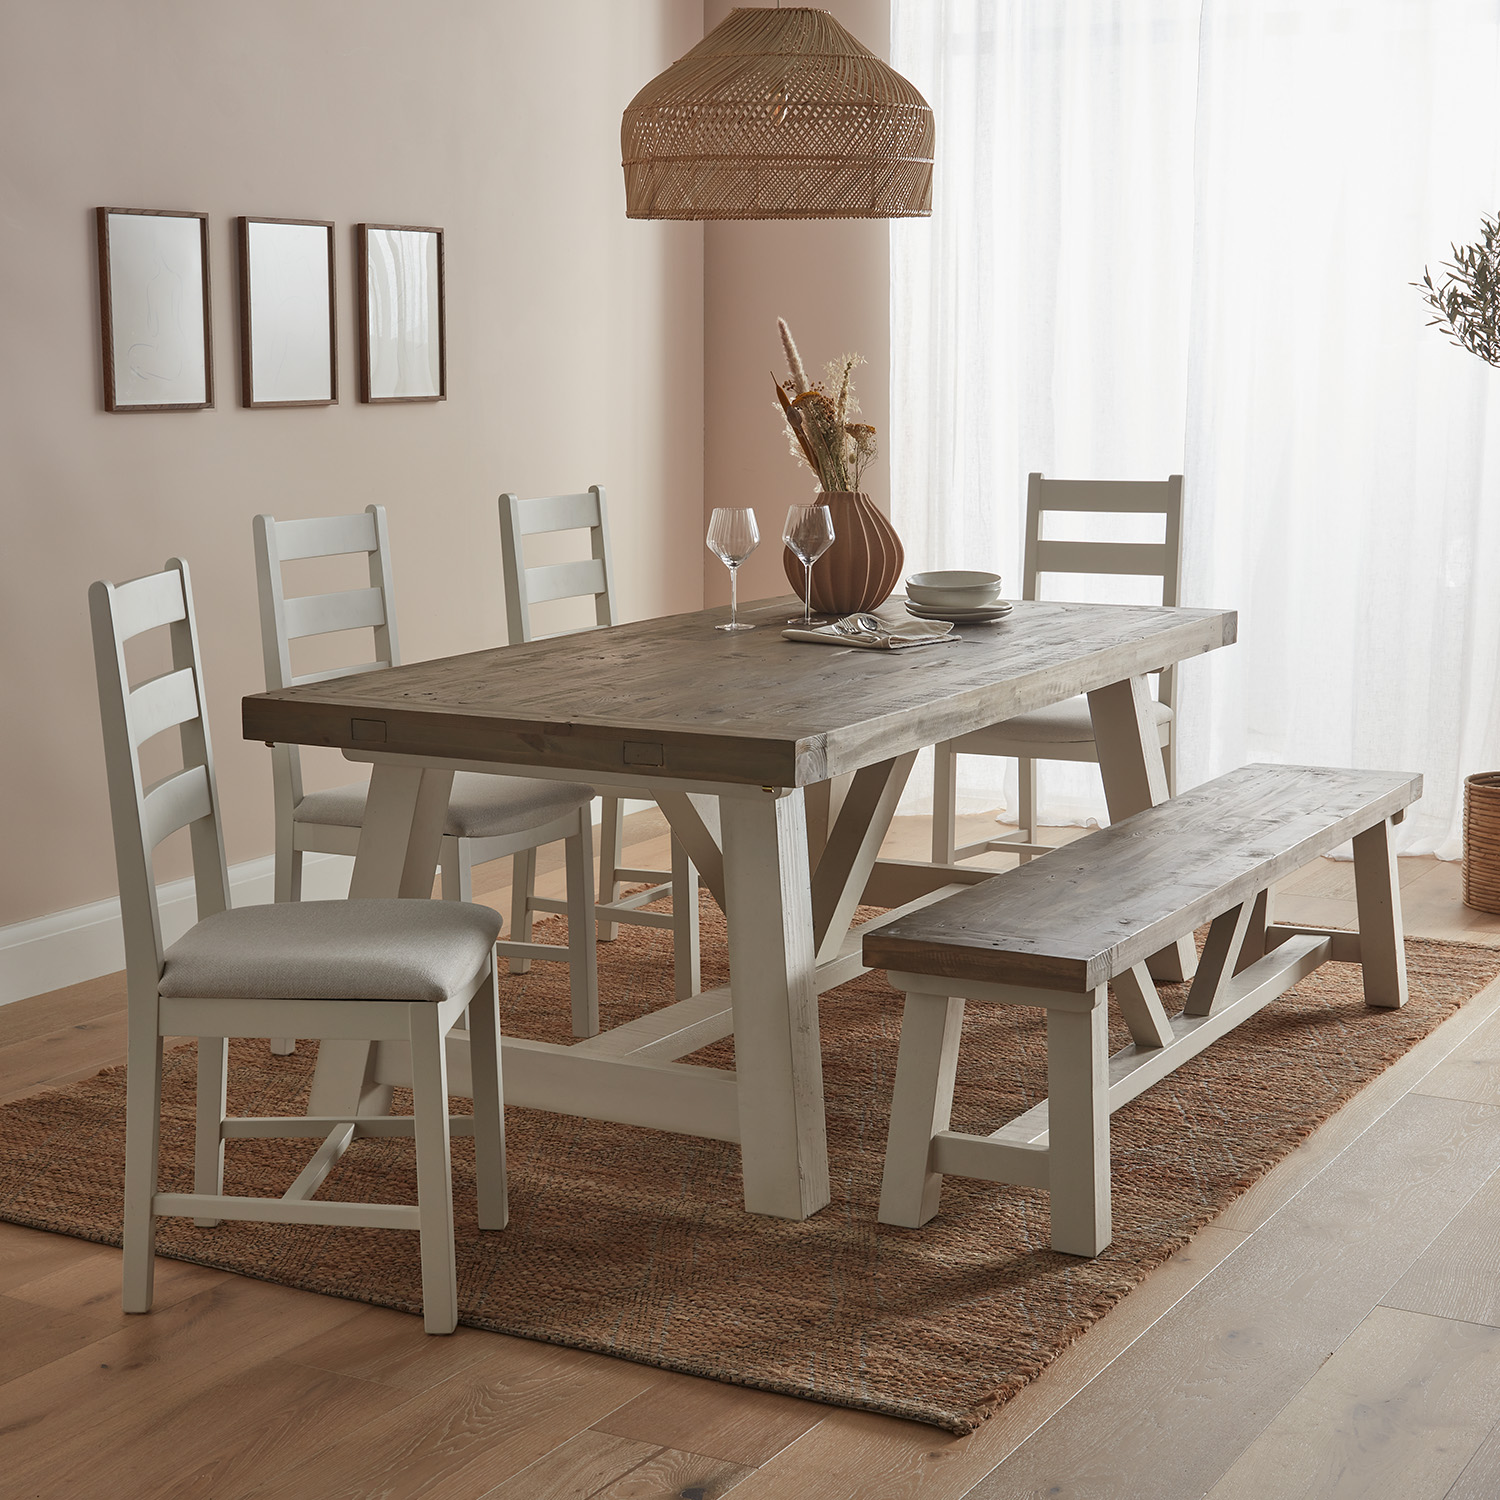 Modern Farmhouse Dining Chair Inside Out Living